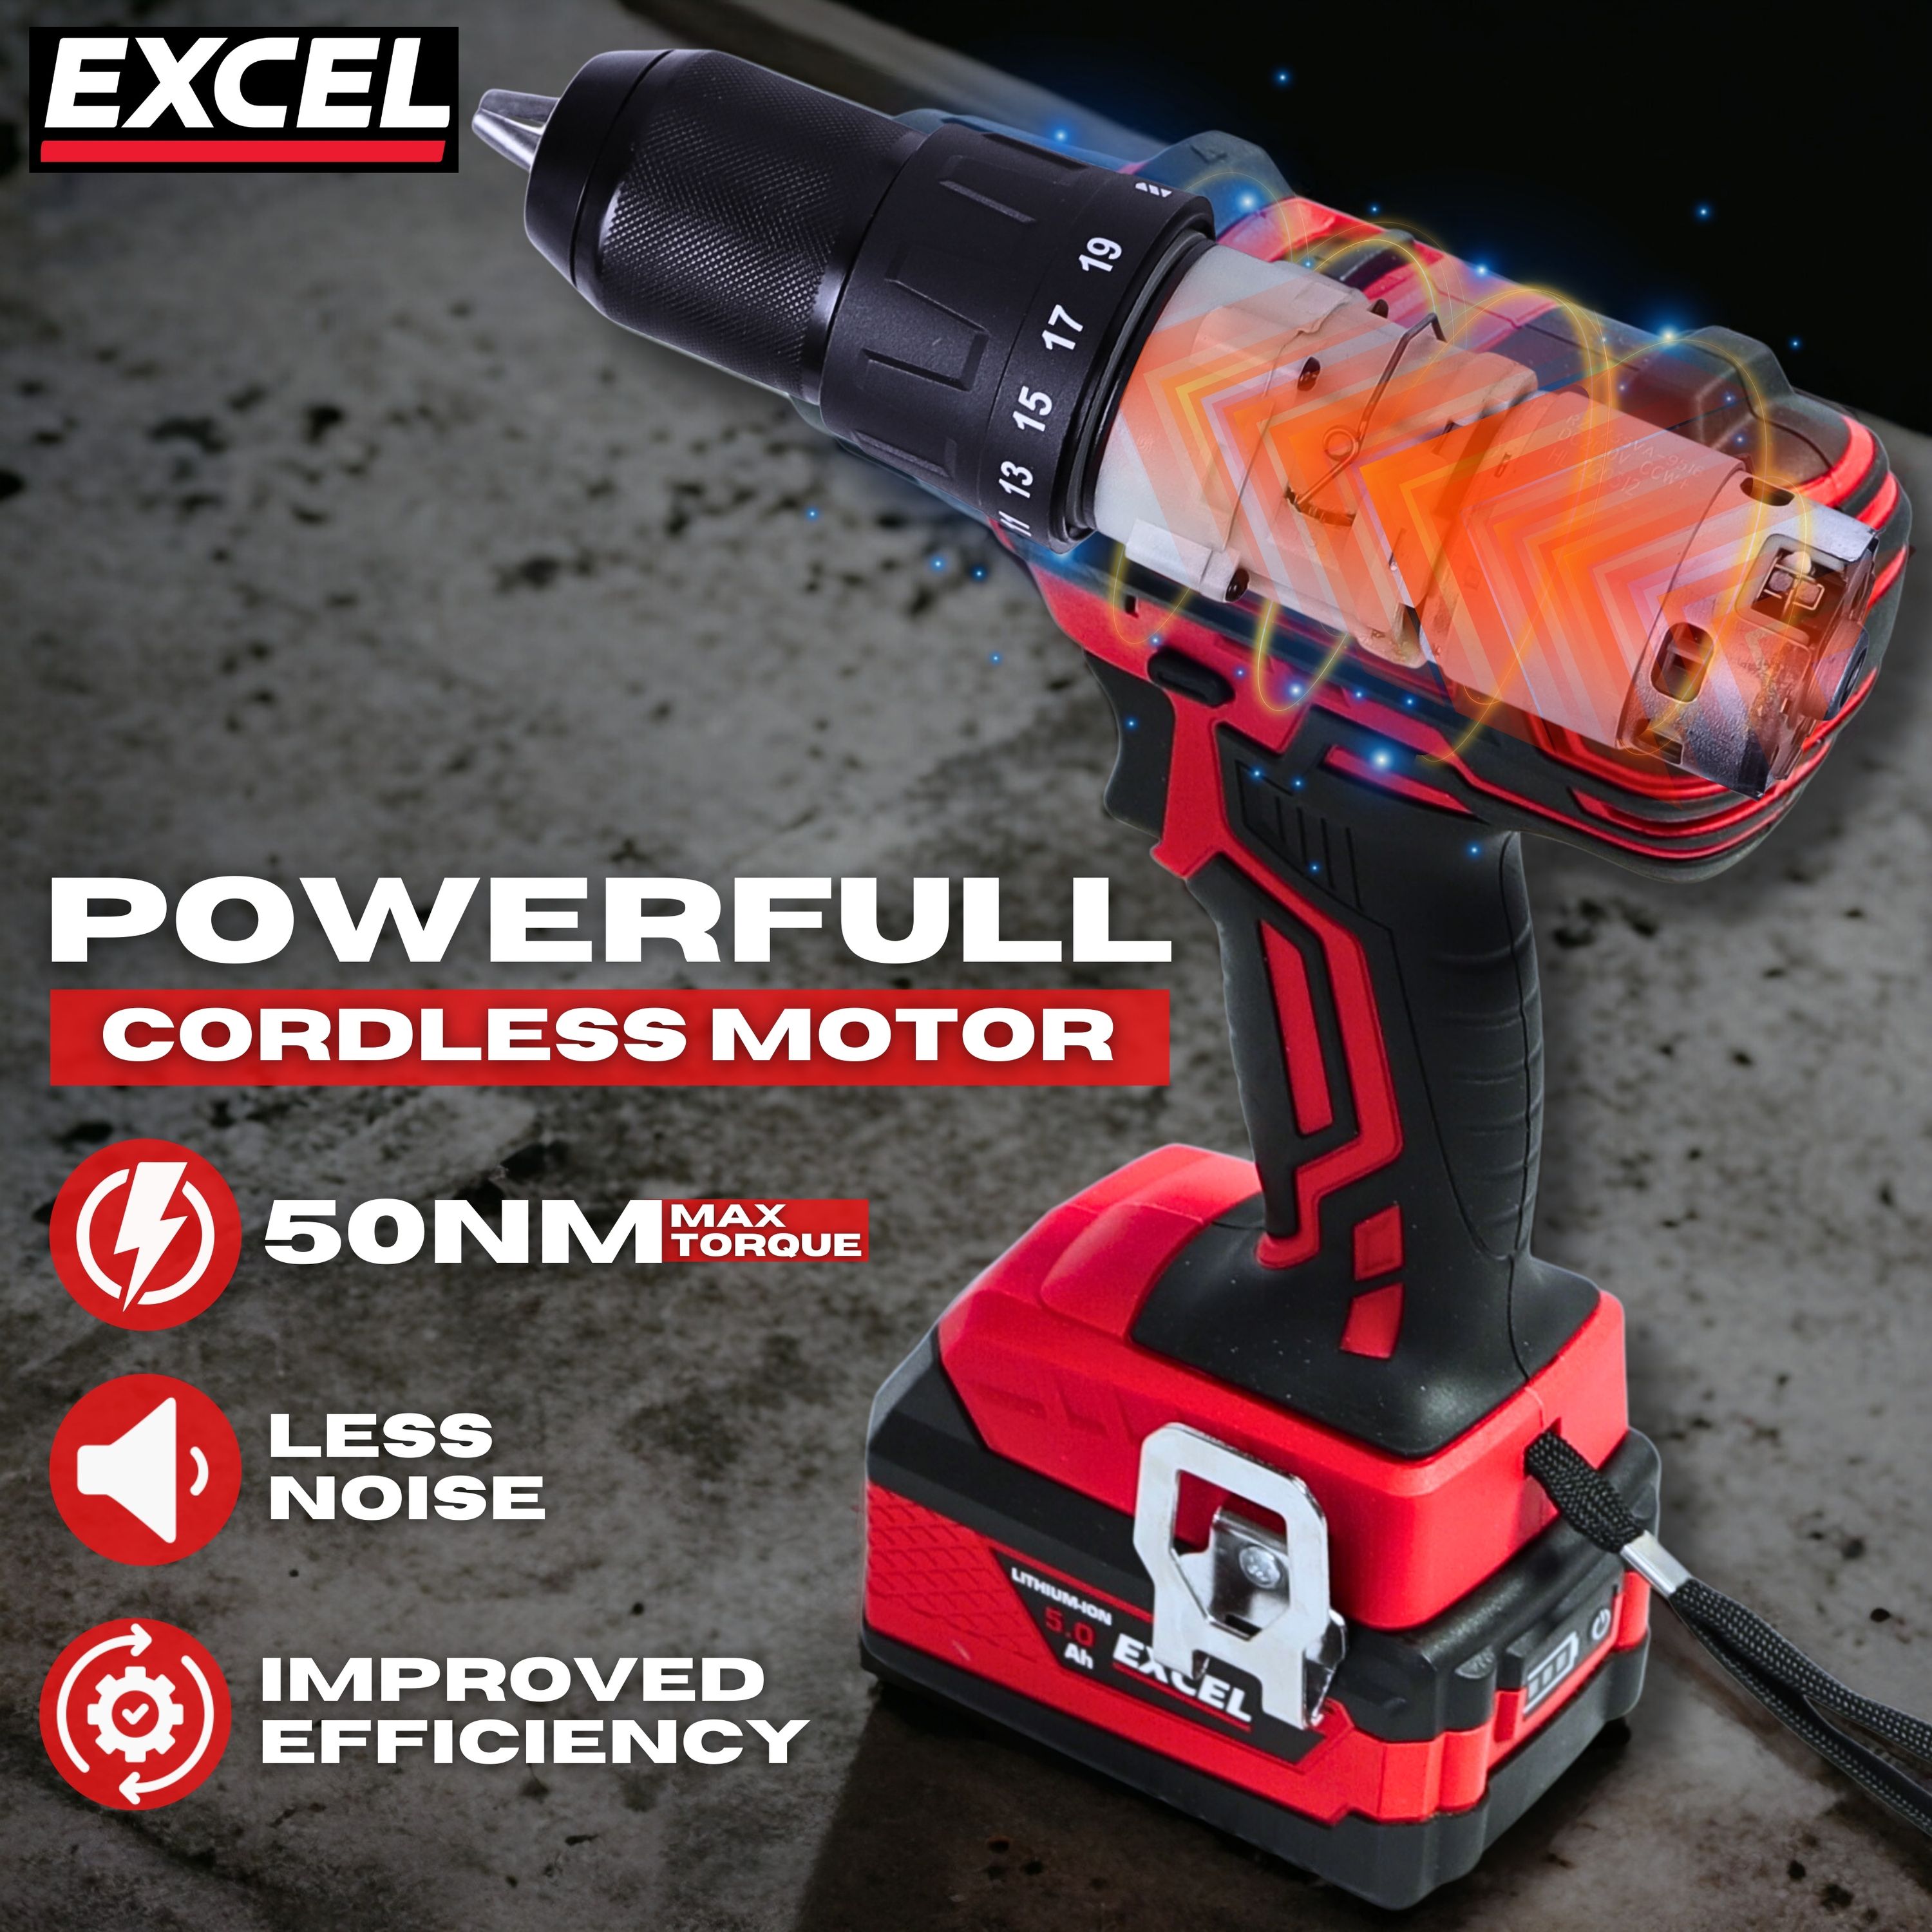 Excel 18V Cordless 6 Piece Tool Kit with 3 x 5.0Ah Batteries & Dual Port Charger in Bag EXLKIT-601